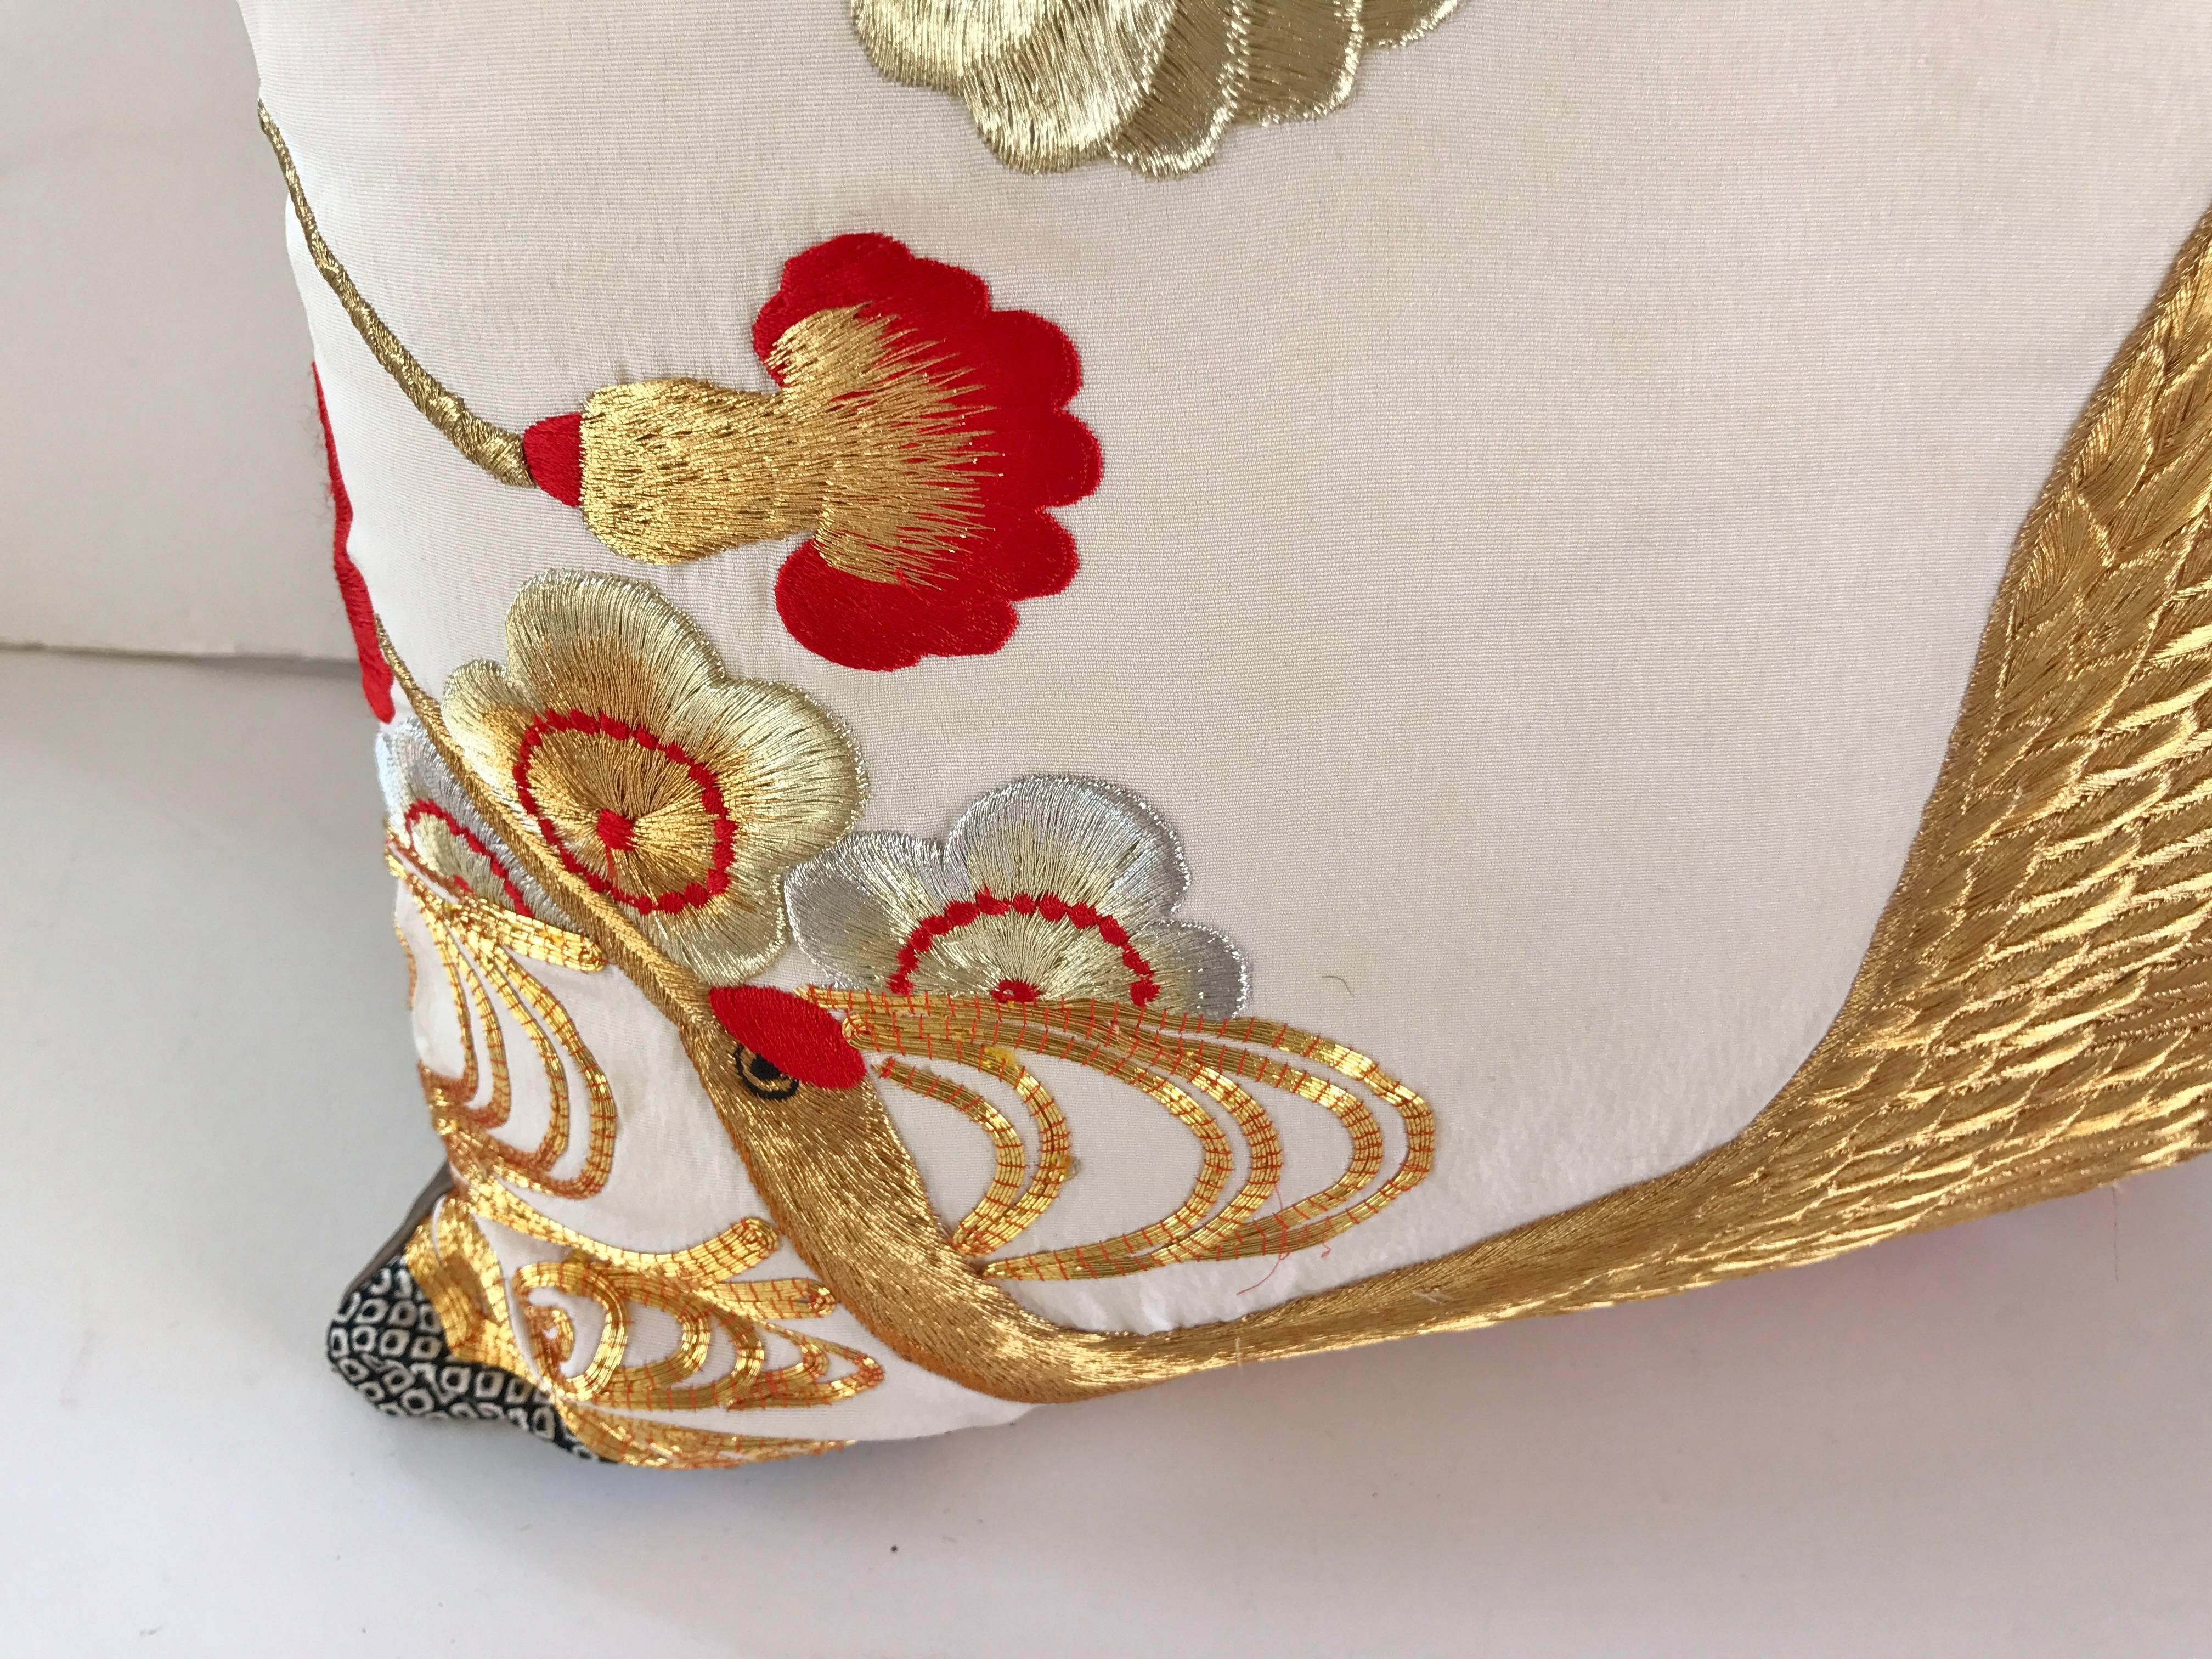 Custom pillow cut from a vintage Japanese silk Uchikake, the traditional wedding kimono. Silk is embroidered with metallic and silk threads in traditional Japanese designs. Pillow is backed in silk, filled with an insert of 100% down and hand-sewn